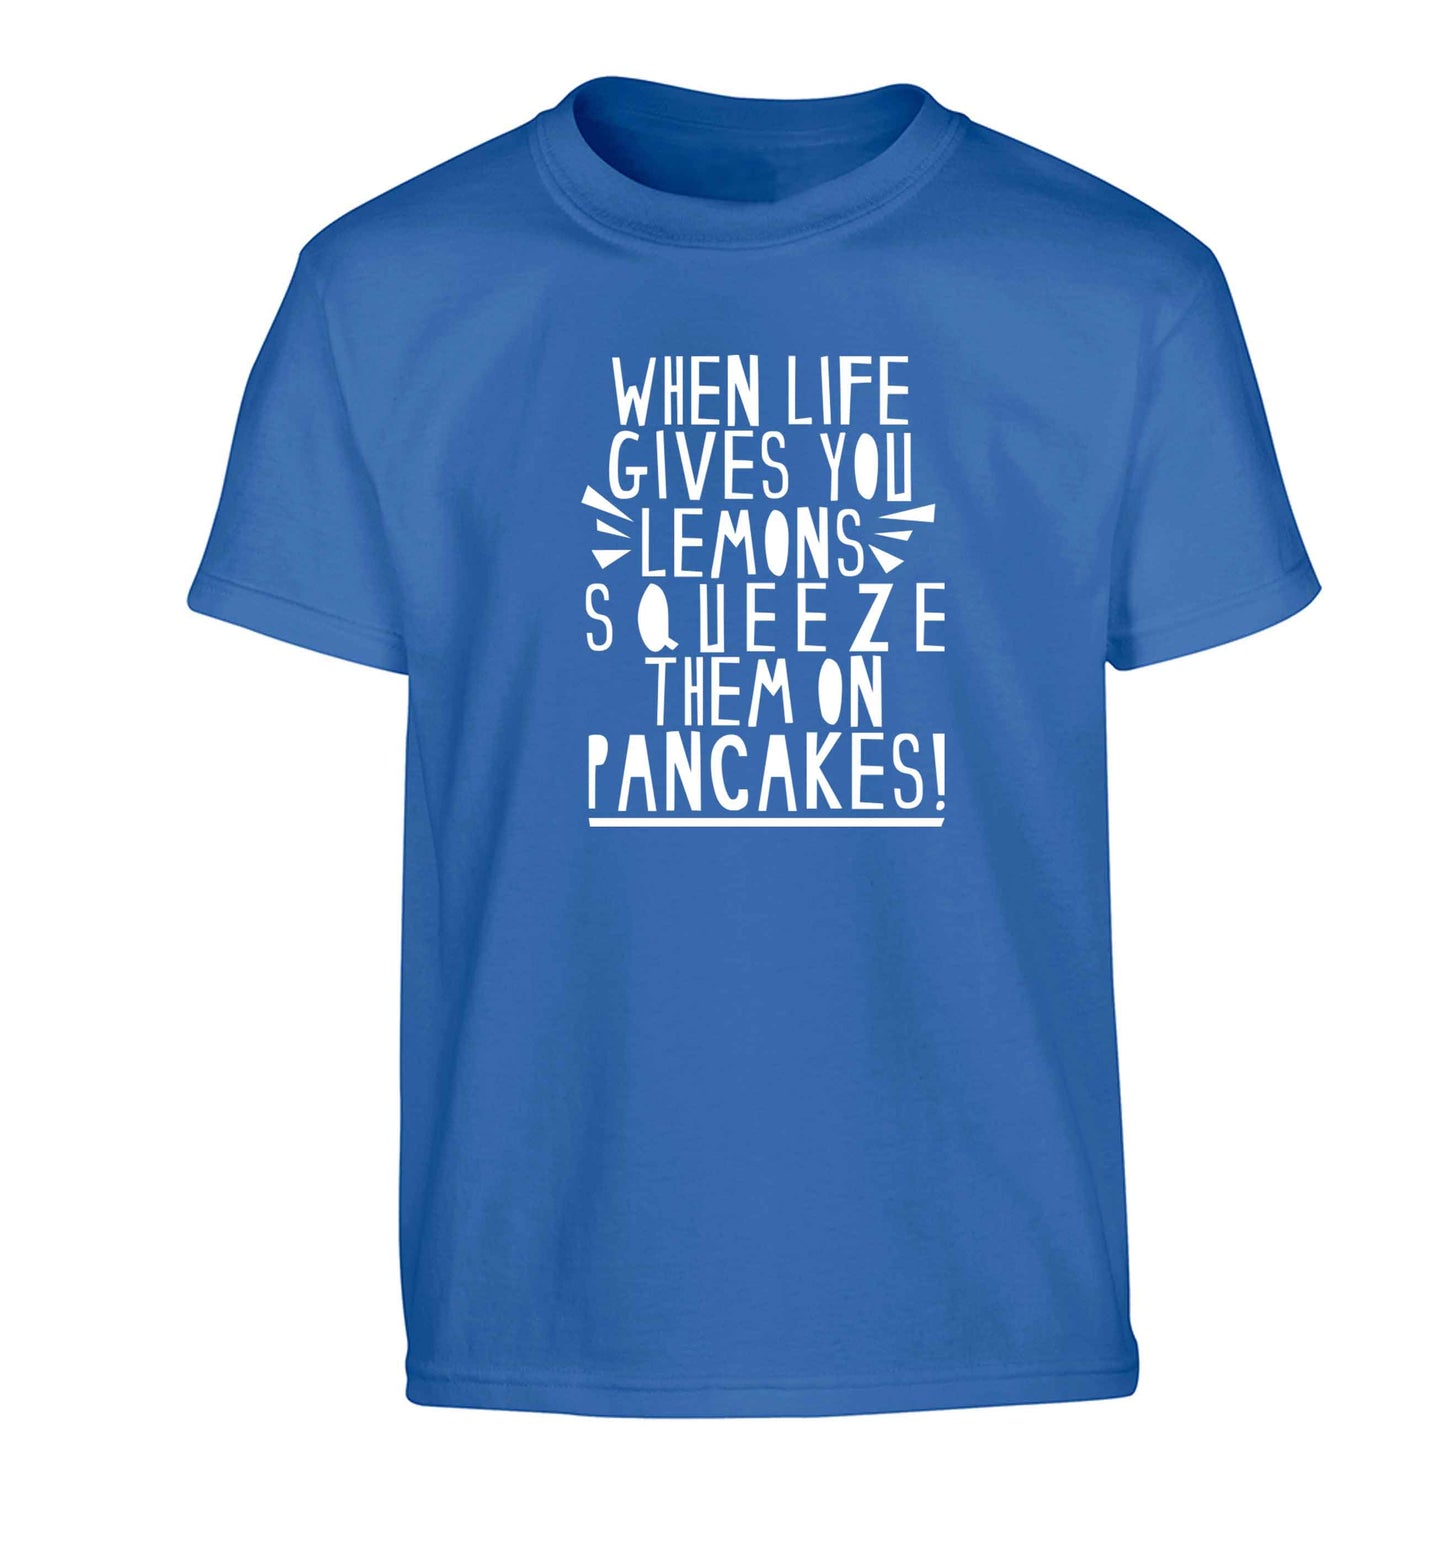 When life gives you lemons squeeze them on pancakes! Children's blue Tshirt 12-13 Years